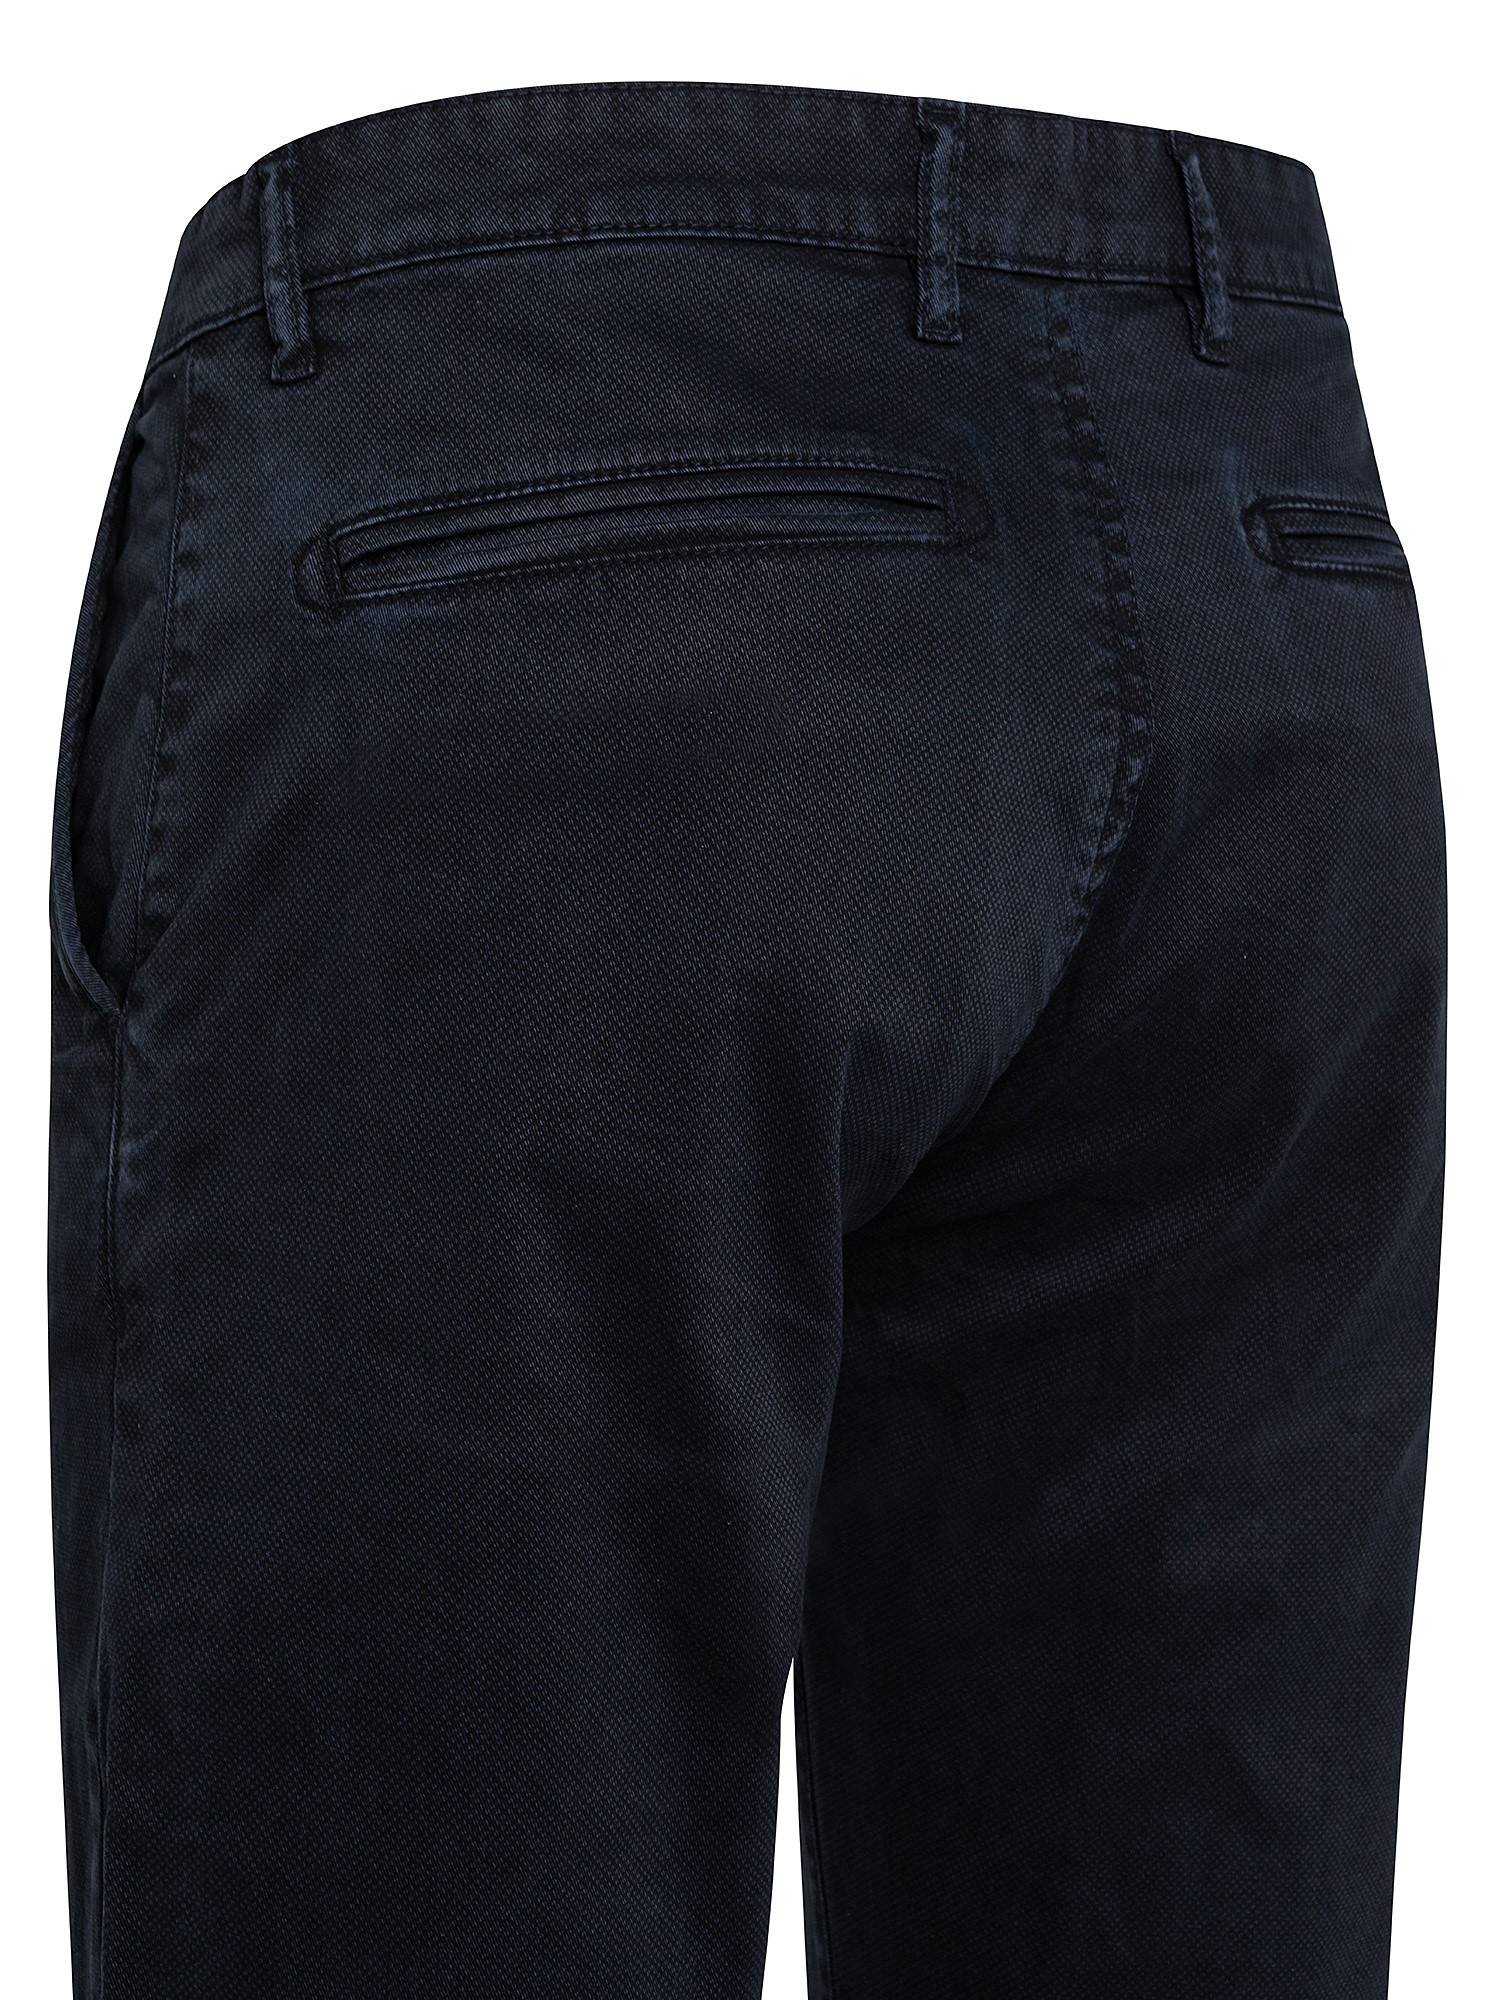 Pantalone chinos in cotone stretch, Blu scuro, large image number 2